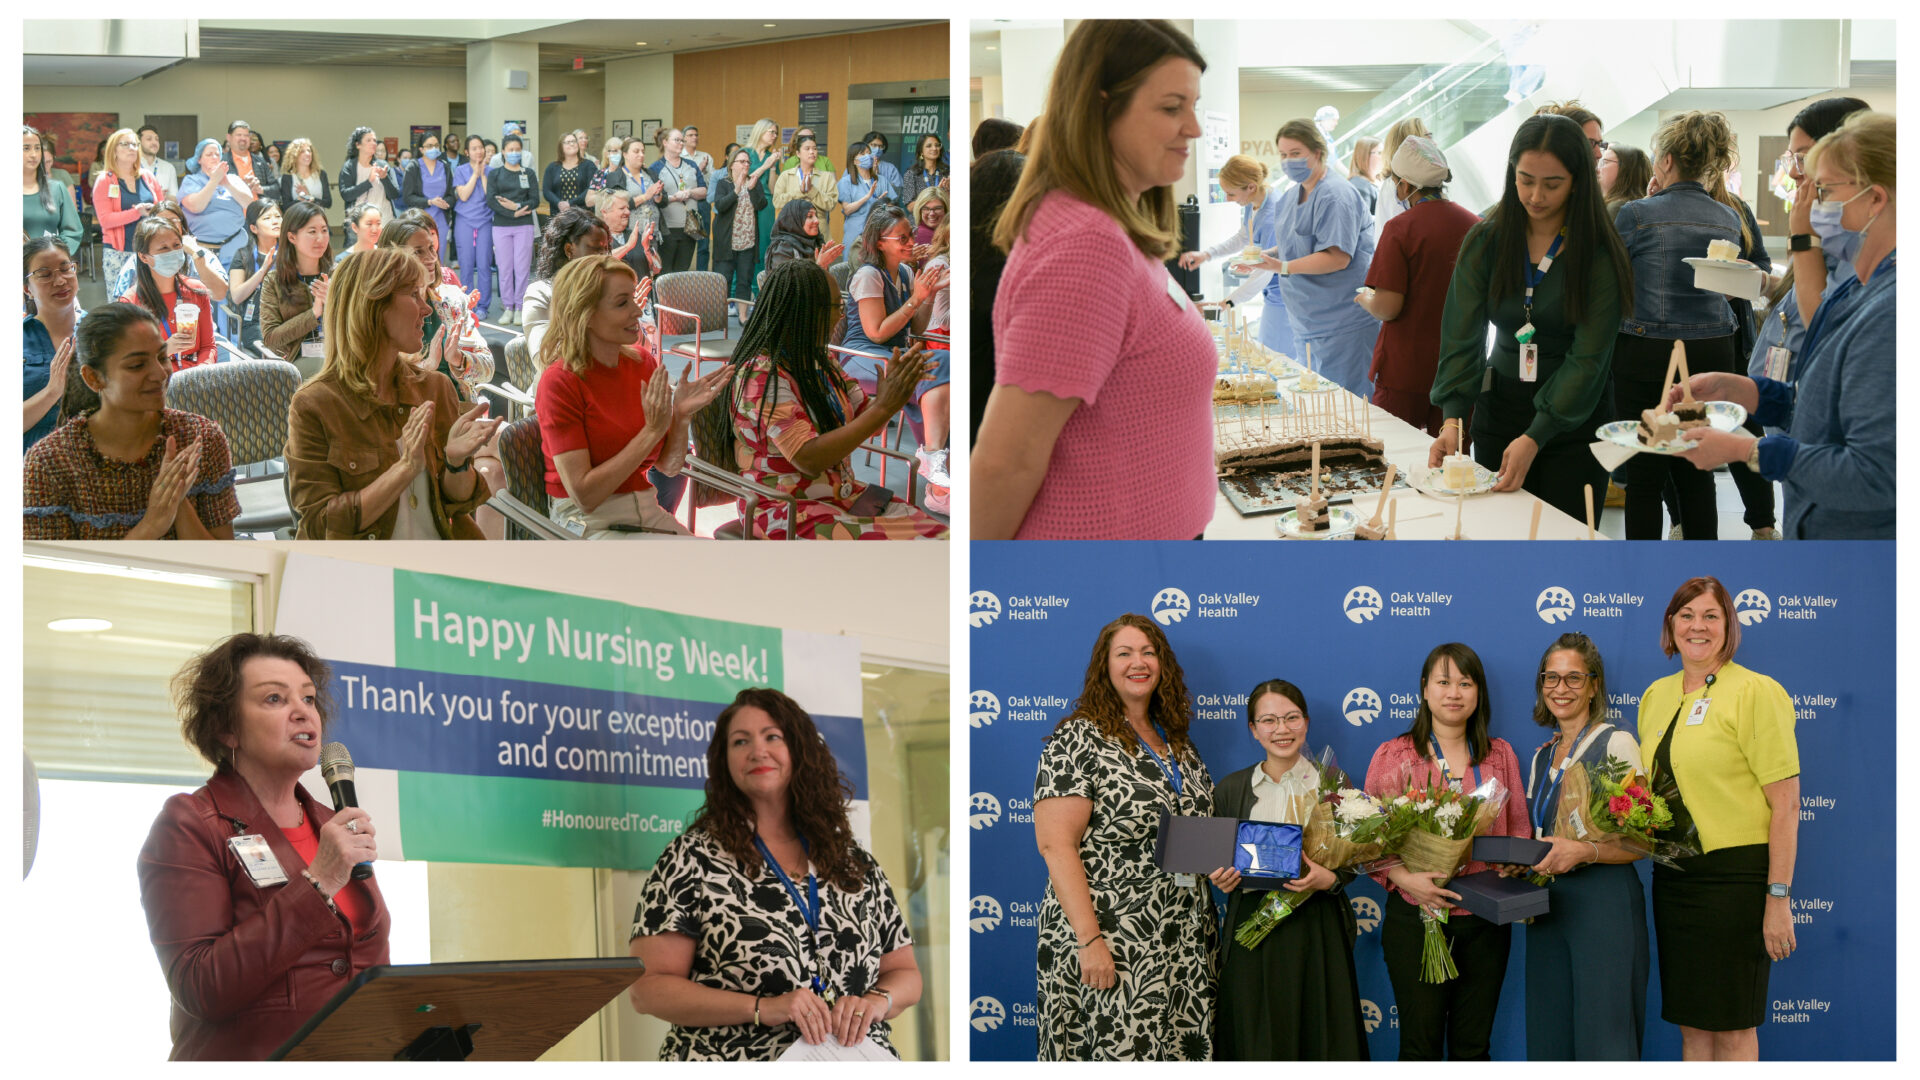 Collage image of the Oak Valley Health's nursing week awards at Markham Stouffville Hospital featuring a photo of the audiences at the lower link lobby, a second photo of staff picking up cakes, a third photo of the CEO, Jo-anne Marr, speaking with a microphone with another staff and a fourth photo of the award winners with Terri McEwan,  Vice President, Clinical Programs and Chief Nurse Executive (CNE) of Oak Valley Health